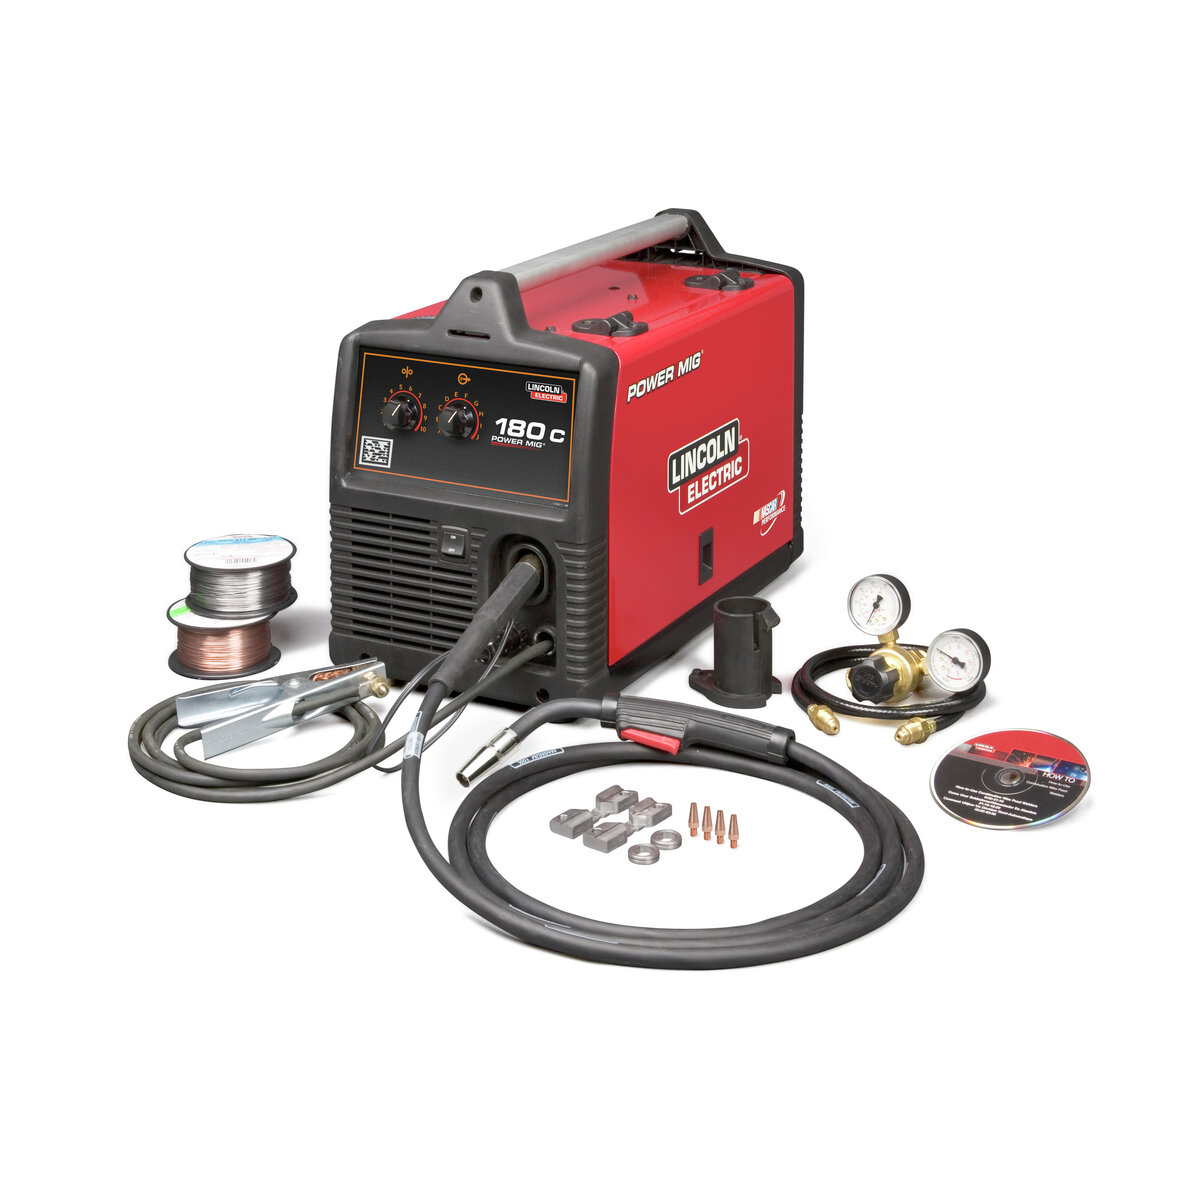 Airgas - LINK2473-2 - Lincoln Electric® POWER MIG® 180C Single Phase MIG Welder With 208 - Input Voltage, 180 Amp Max Output, Diamond Core Technology™ And Accessory Package